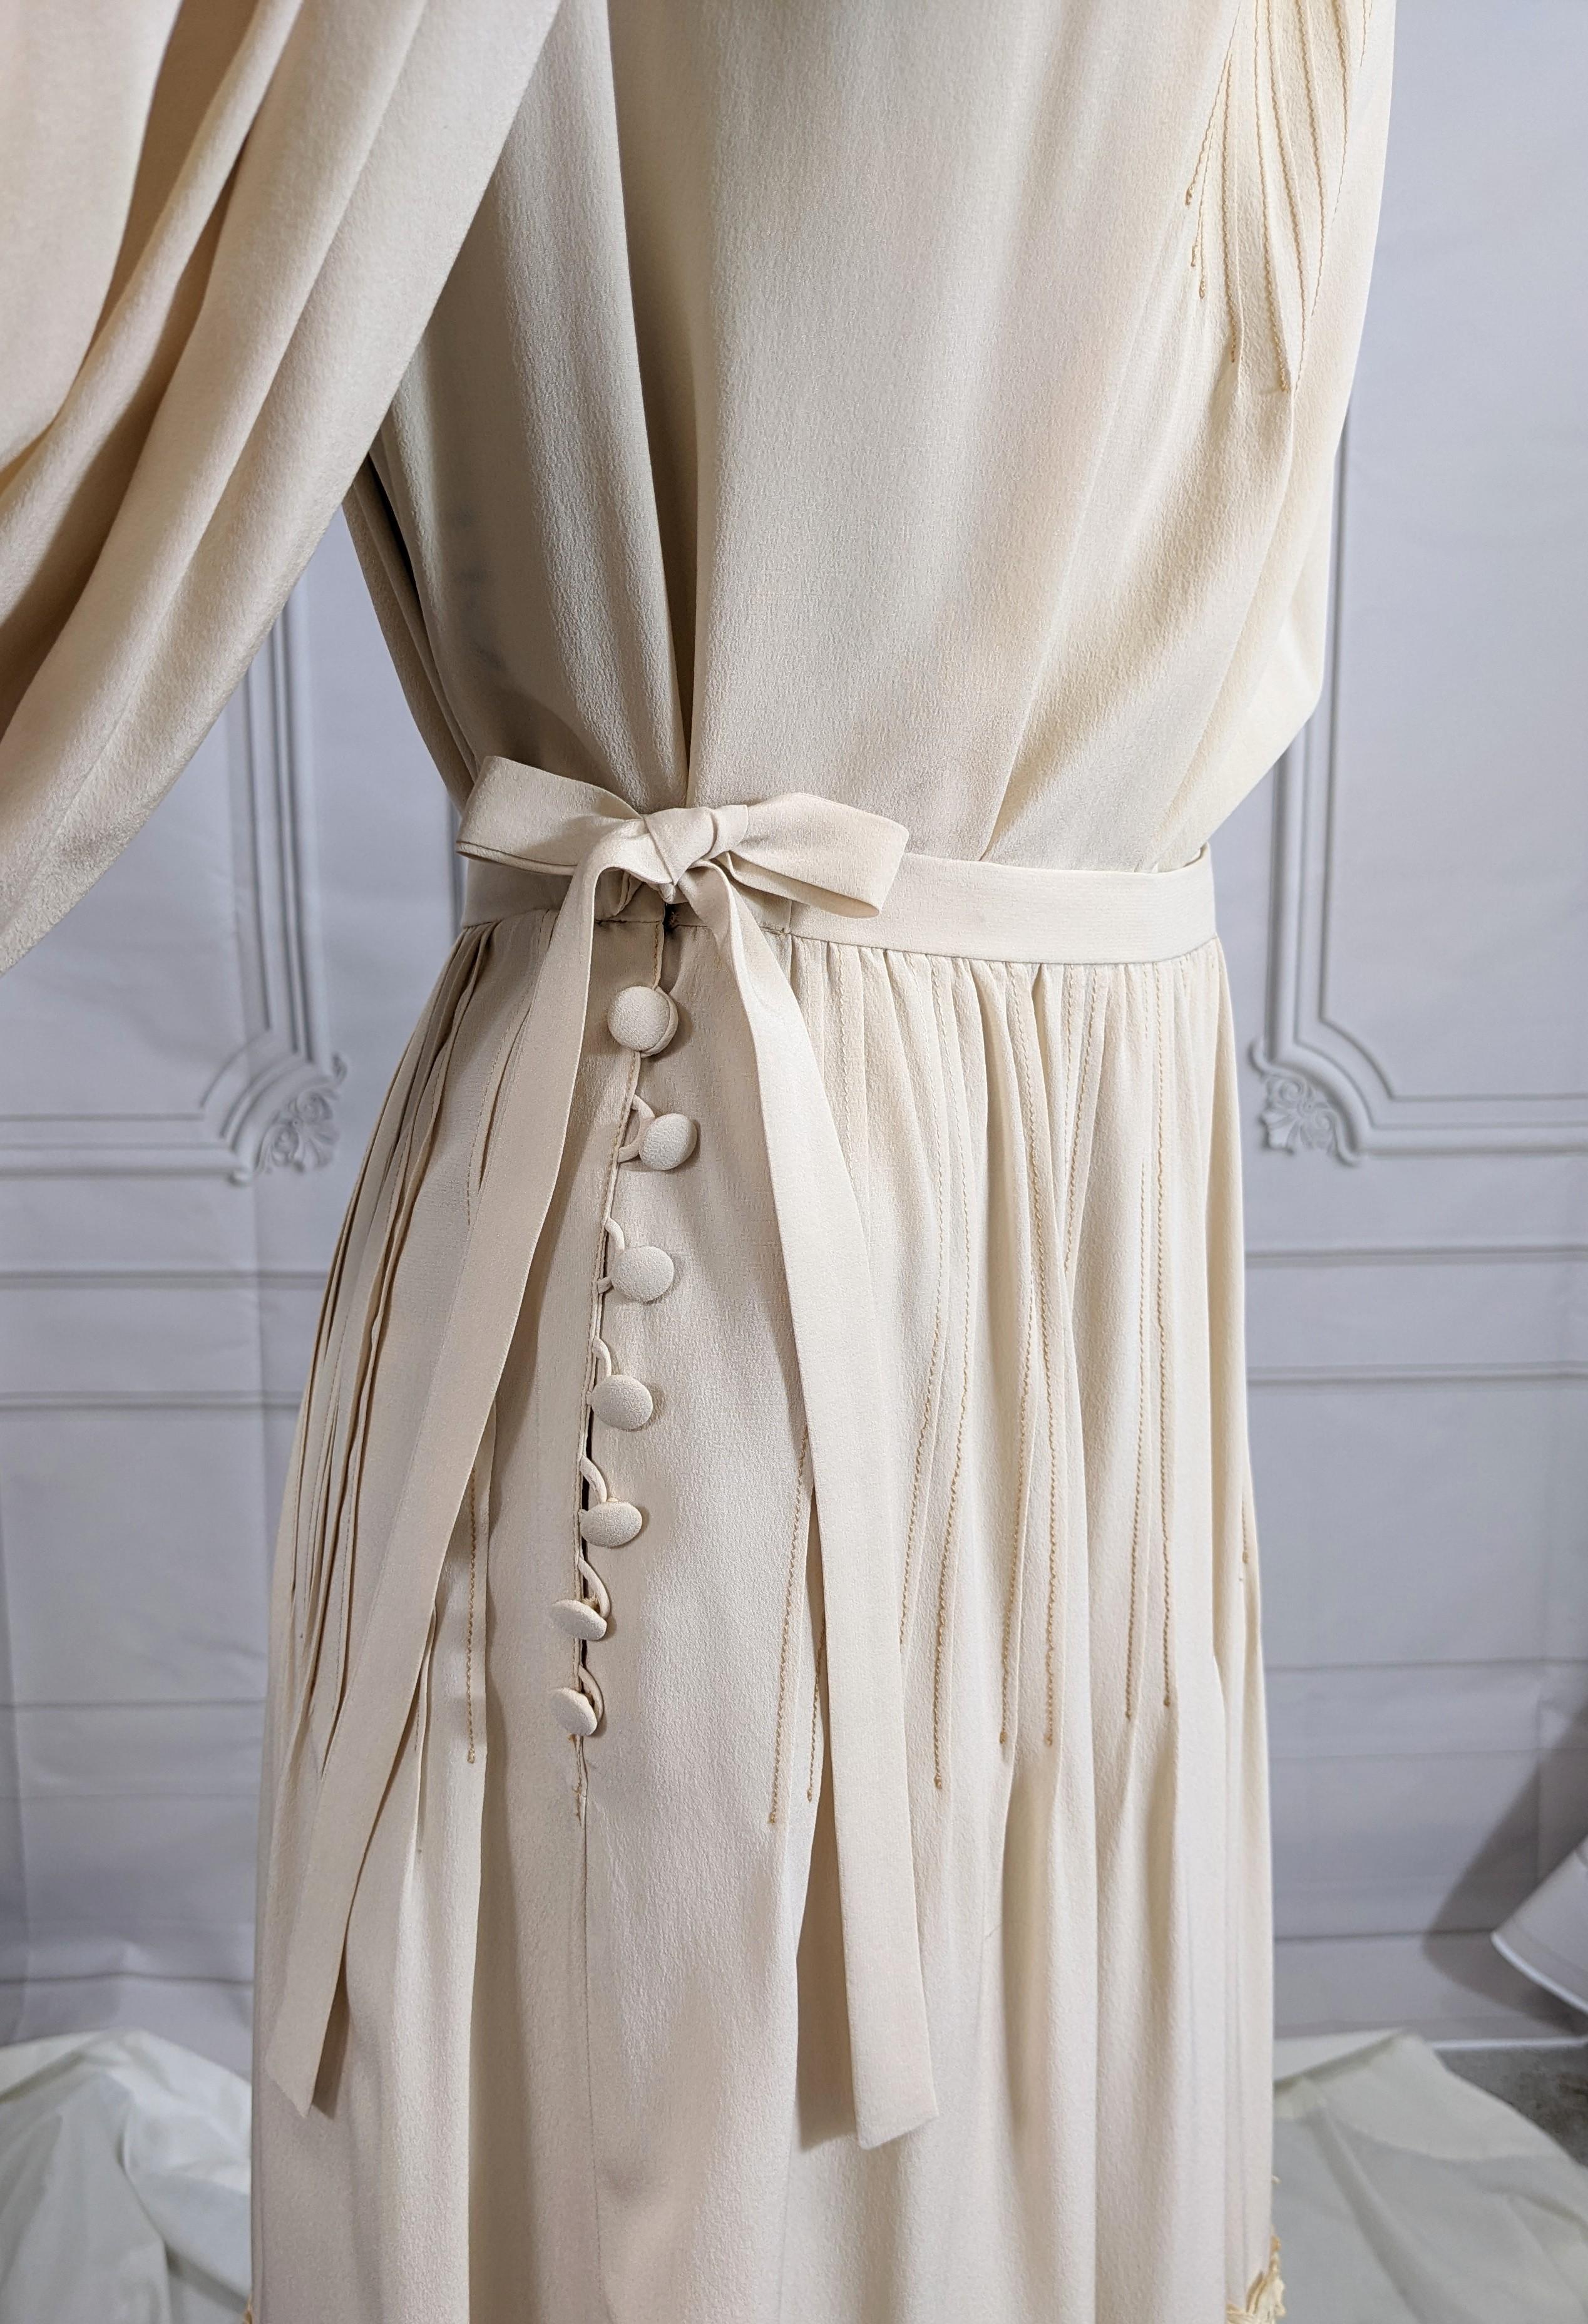 Chloe by Karl Lagerfeld Silk Crepe and Net Edwardian Ensemble In Excellent Condition For Sale In New York, NY